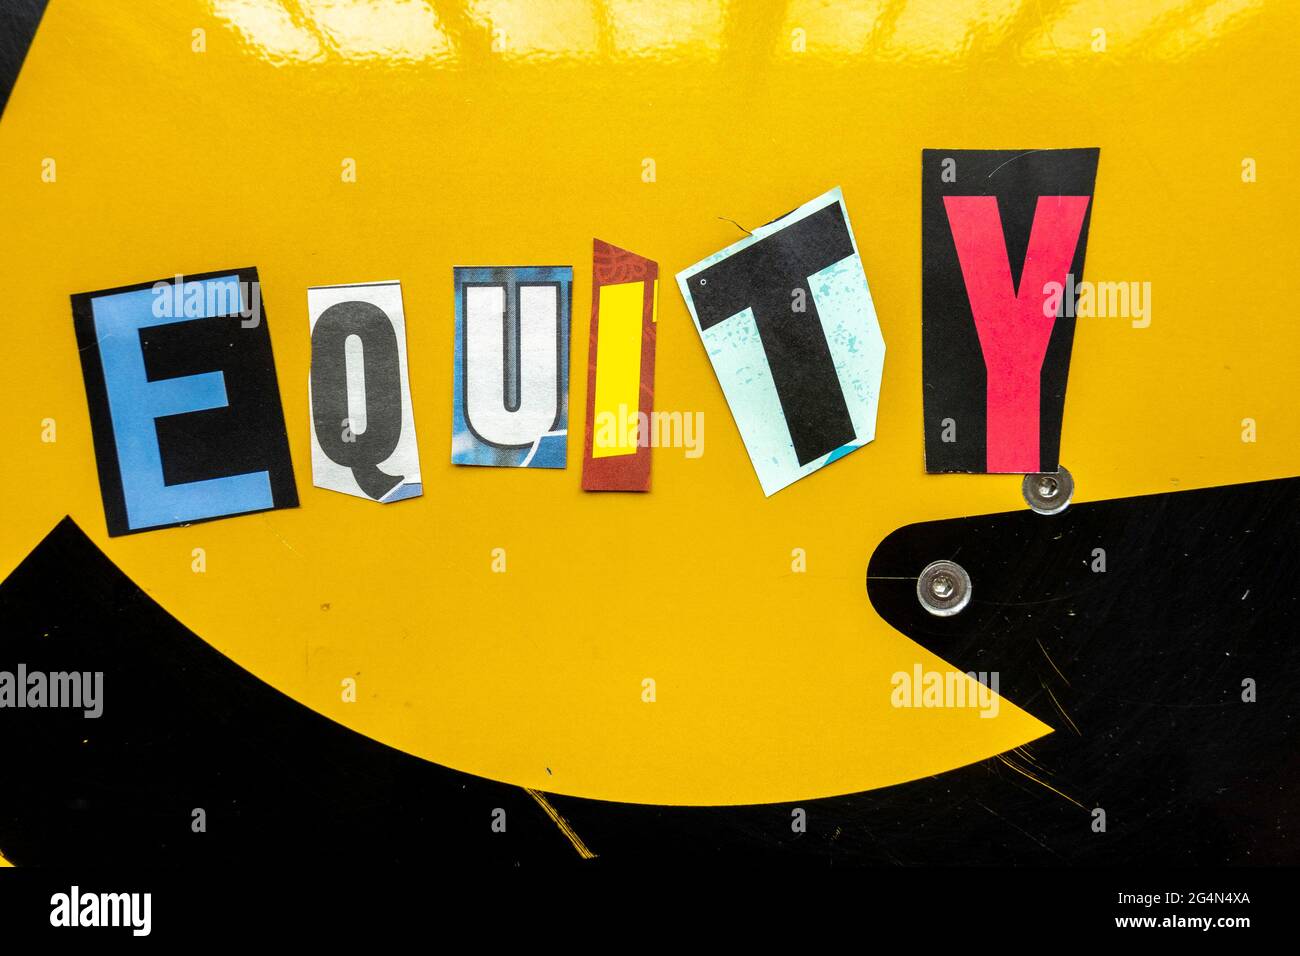 The word 'Equity' using cut-out paper letters in the ransom note effect typography Stock Photo